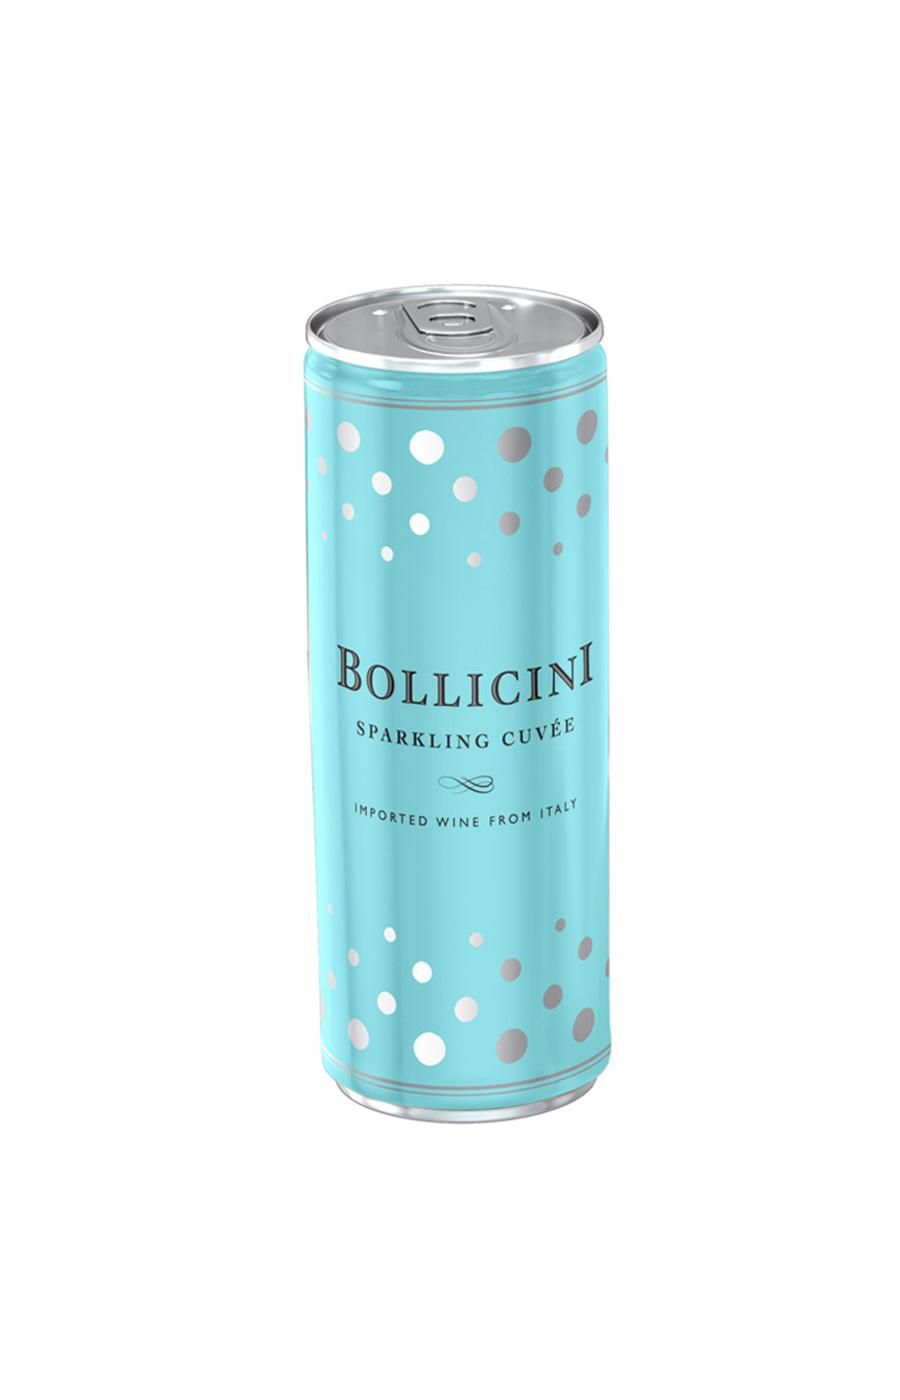 Bollicini Sparkling White Wine 250 mL Cans; image 2 of 2